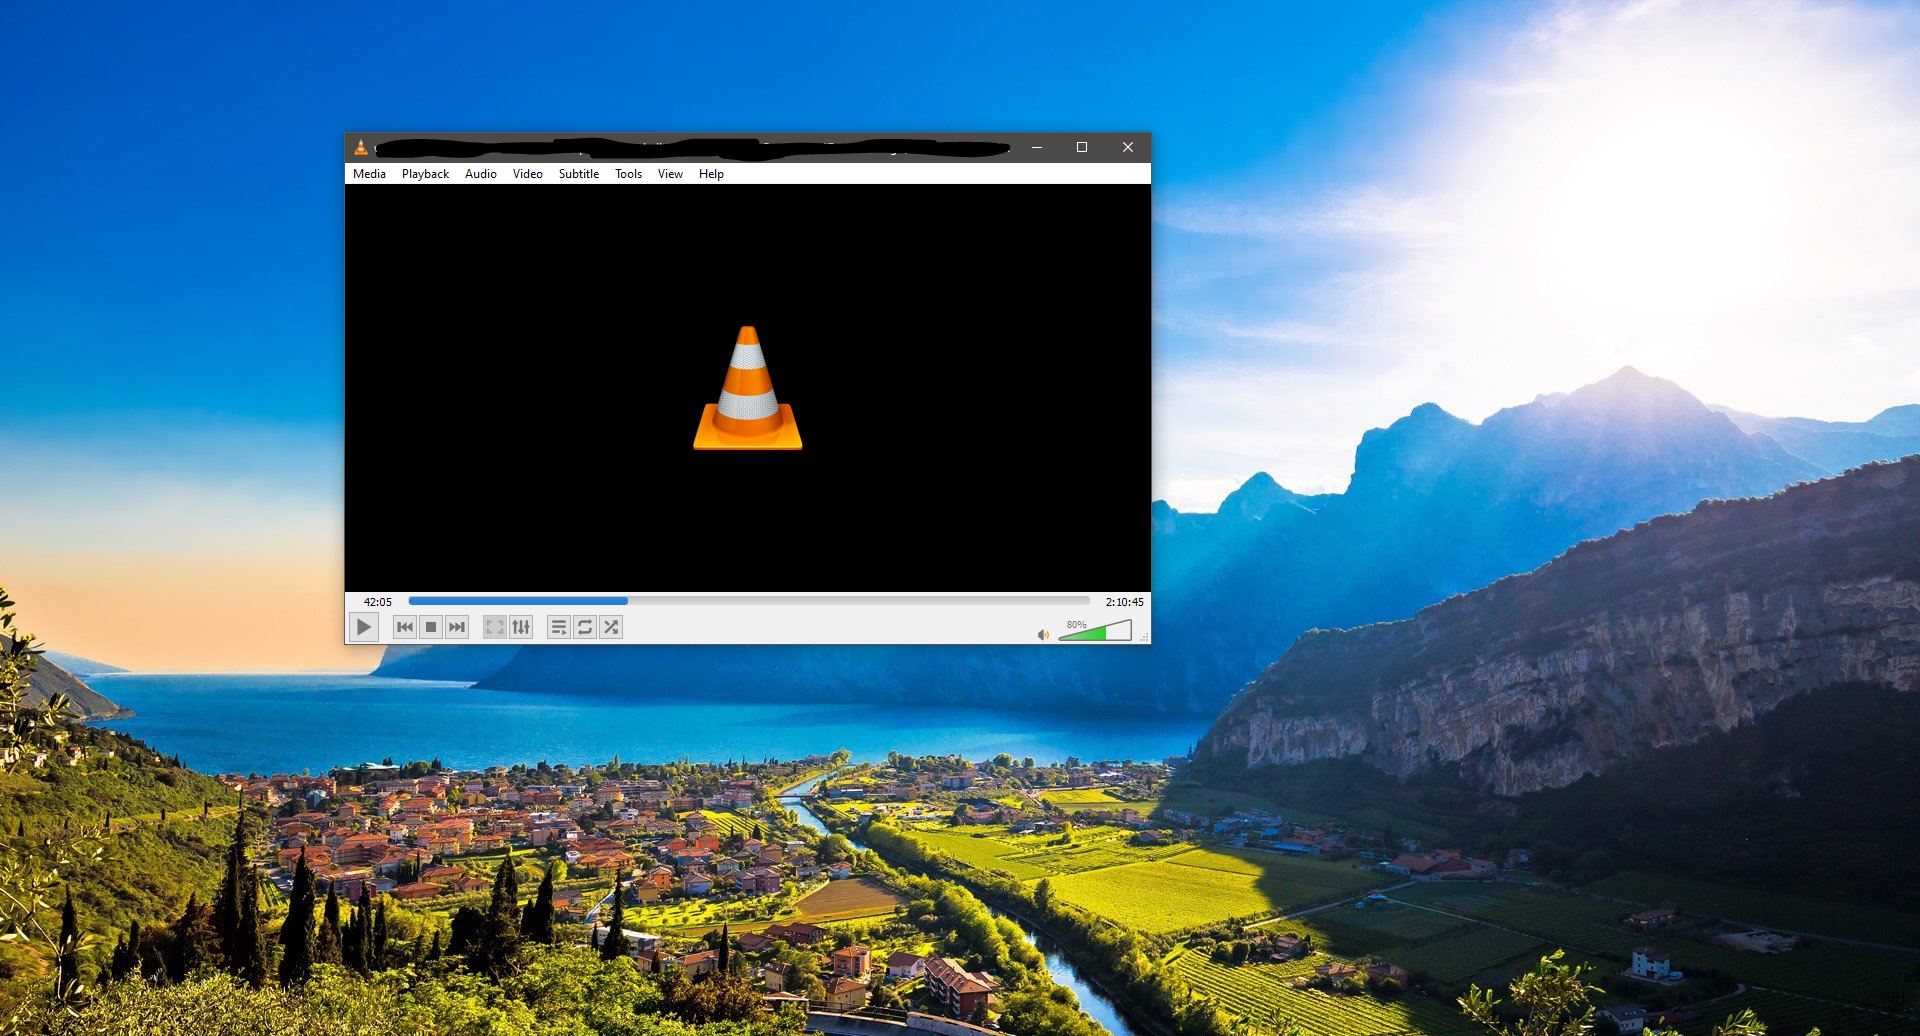 How to play only audio from a Video file using VLC Player?